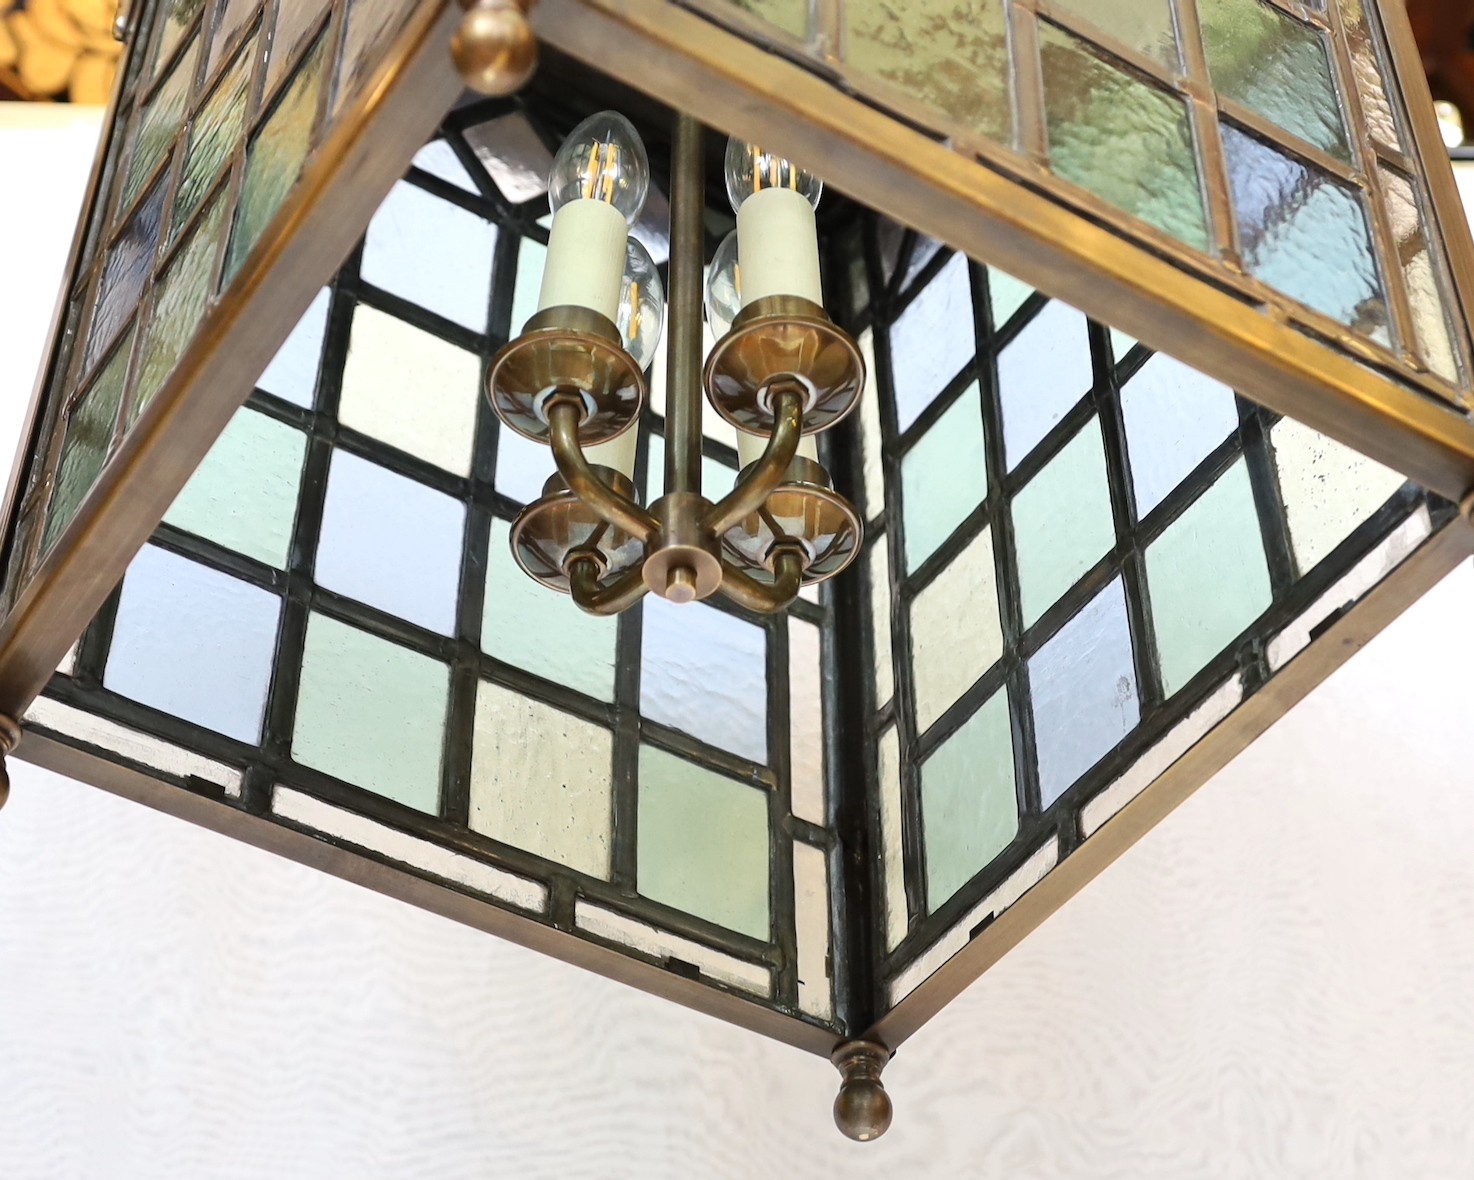 A large Edwardian lacquered brass and leaded glass hall lantern applied with rams head motifs, - Image 4 of 4